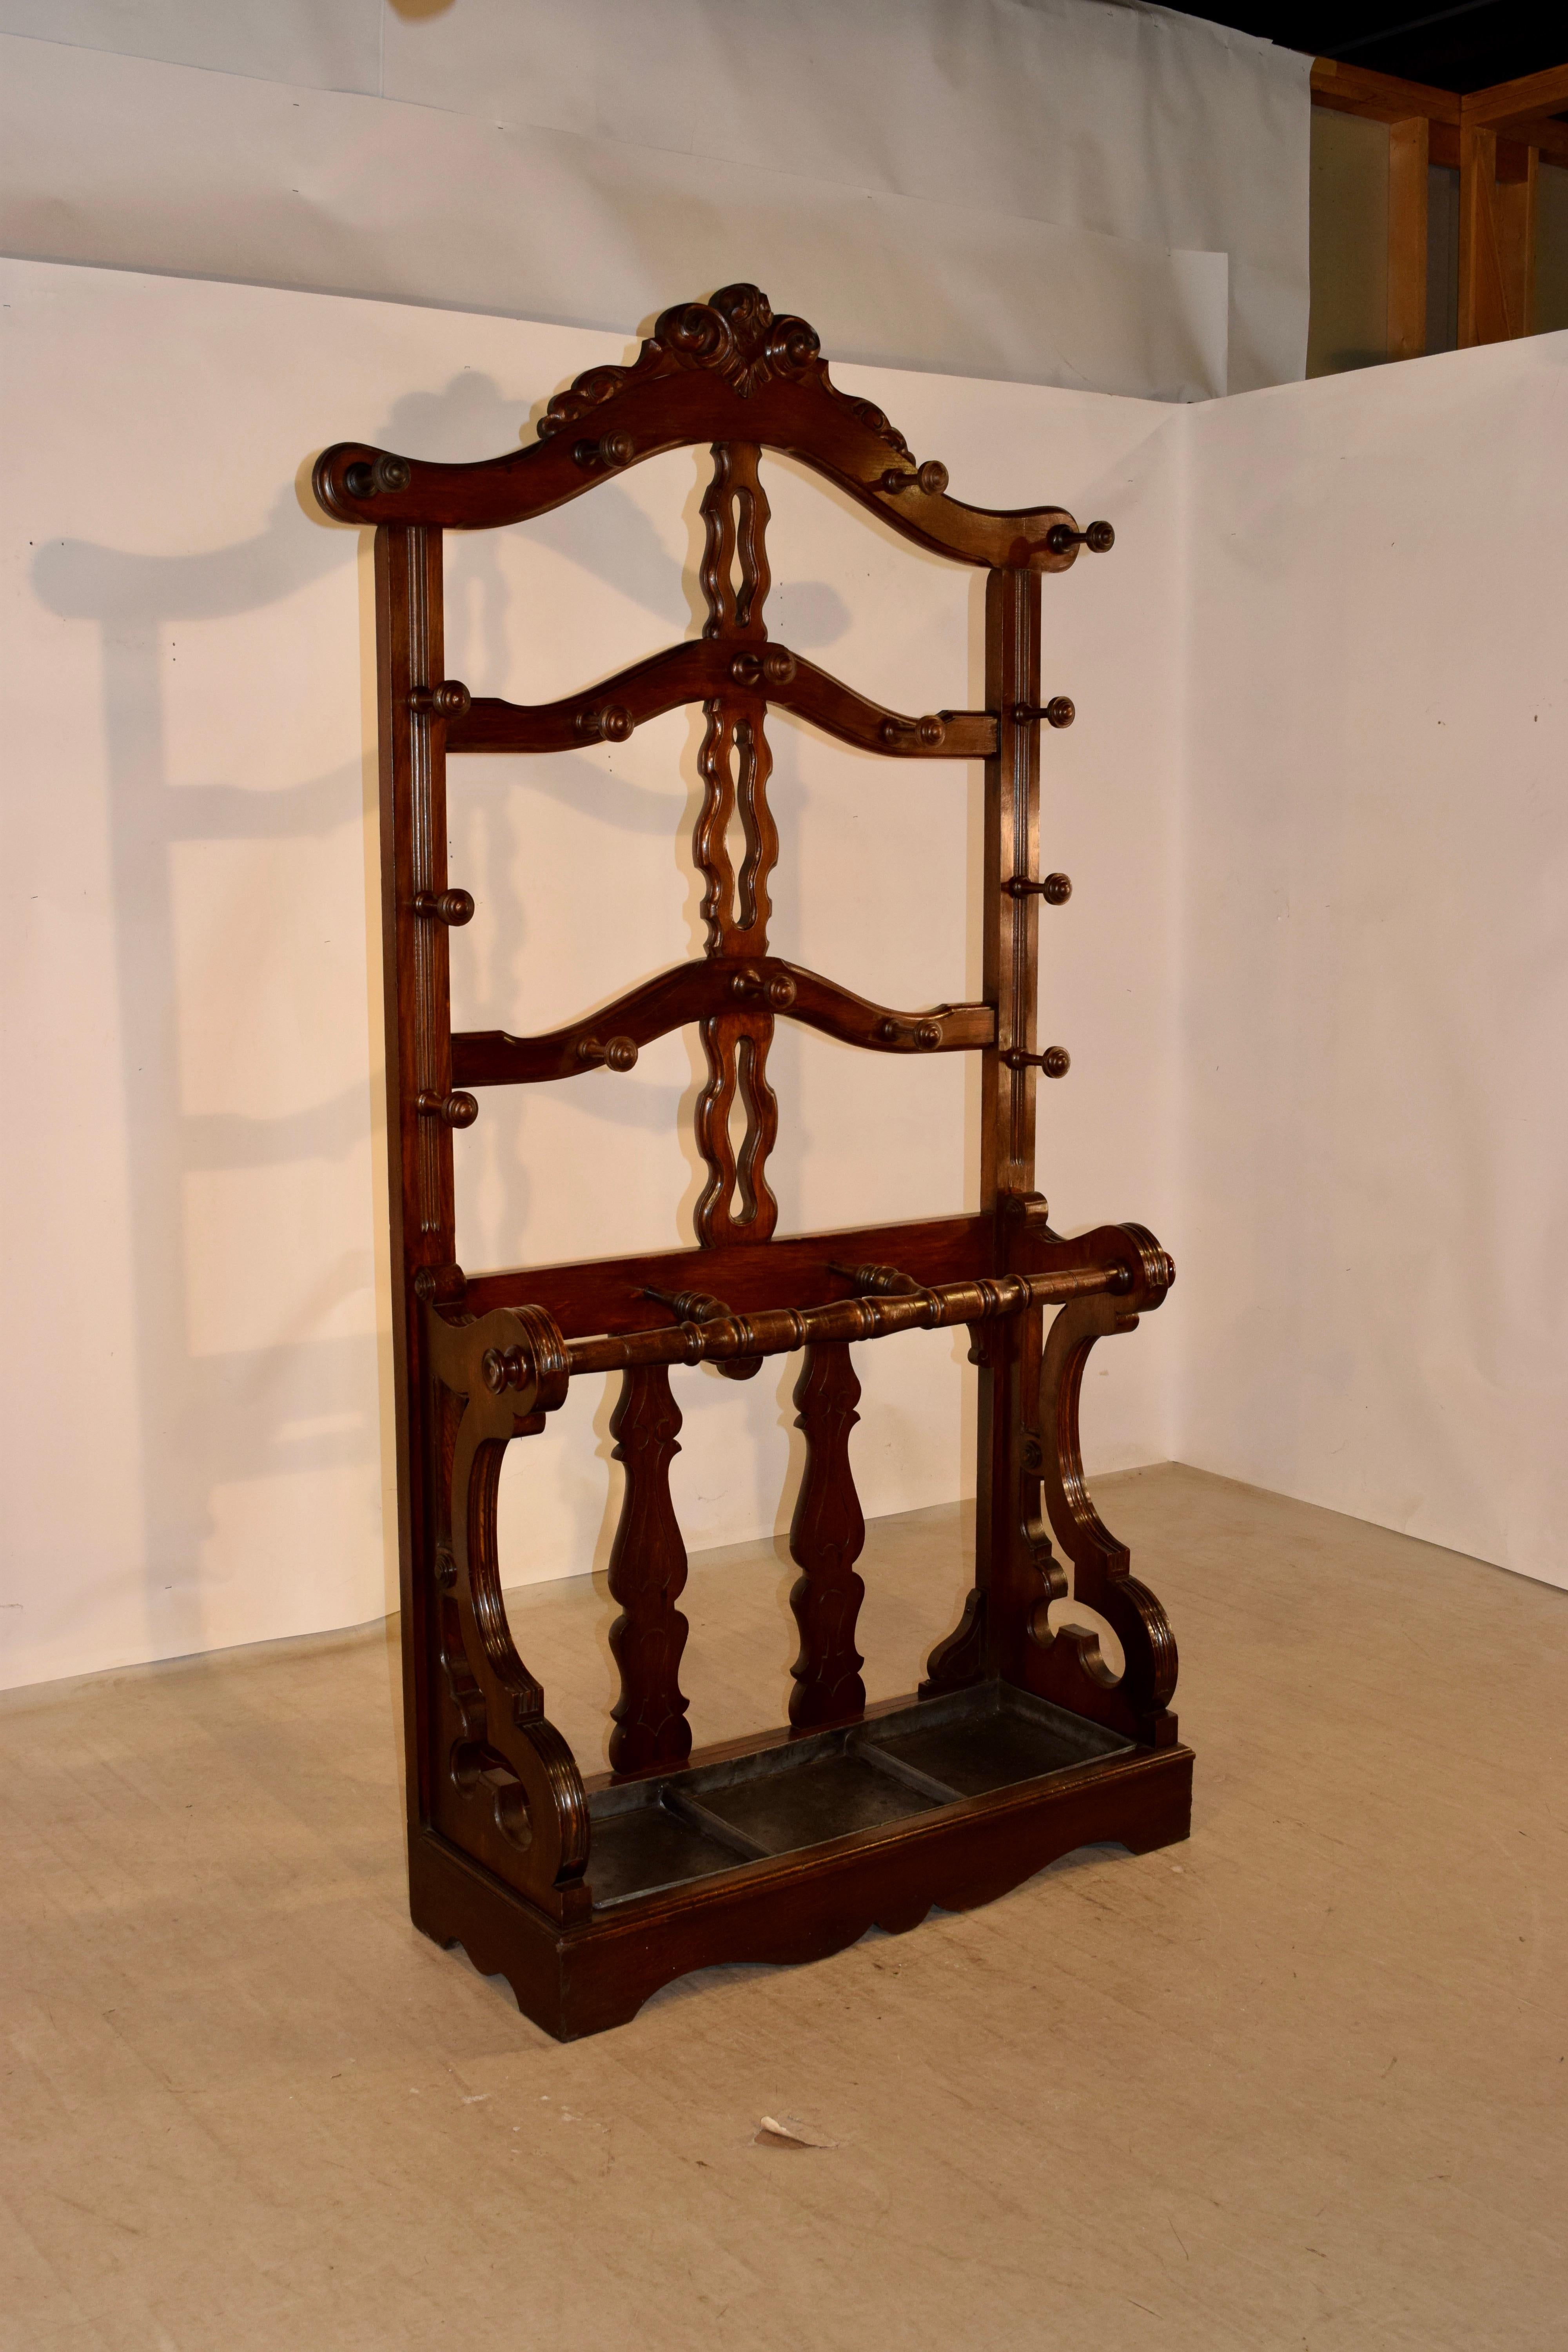 19th century English mahogany hall stand with wonderful shape and carved details. This piece has a lovely profile as well, and would be show-stopping in a stately home. The wood has a beautiful color and the stand has not only a gracious space for